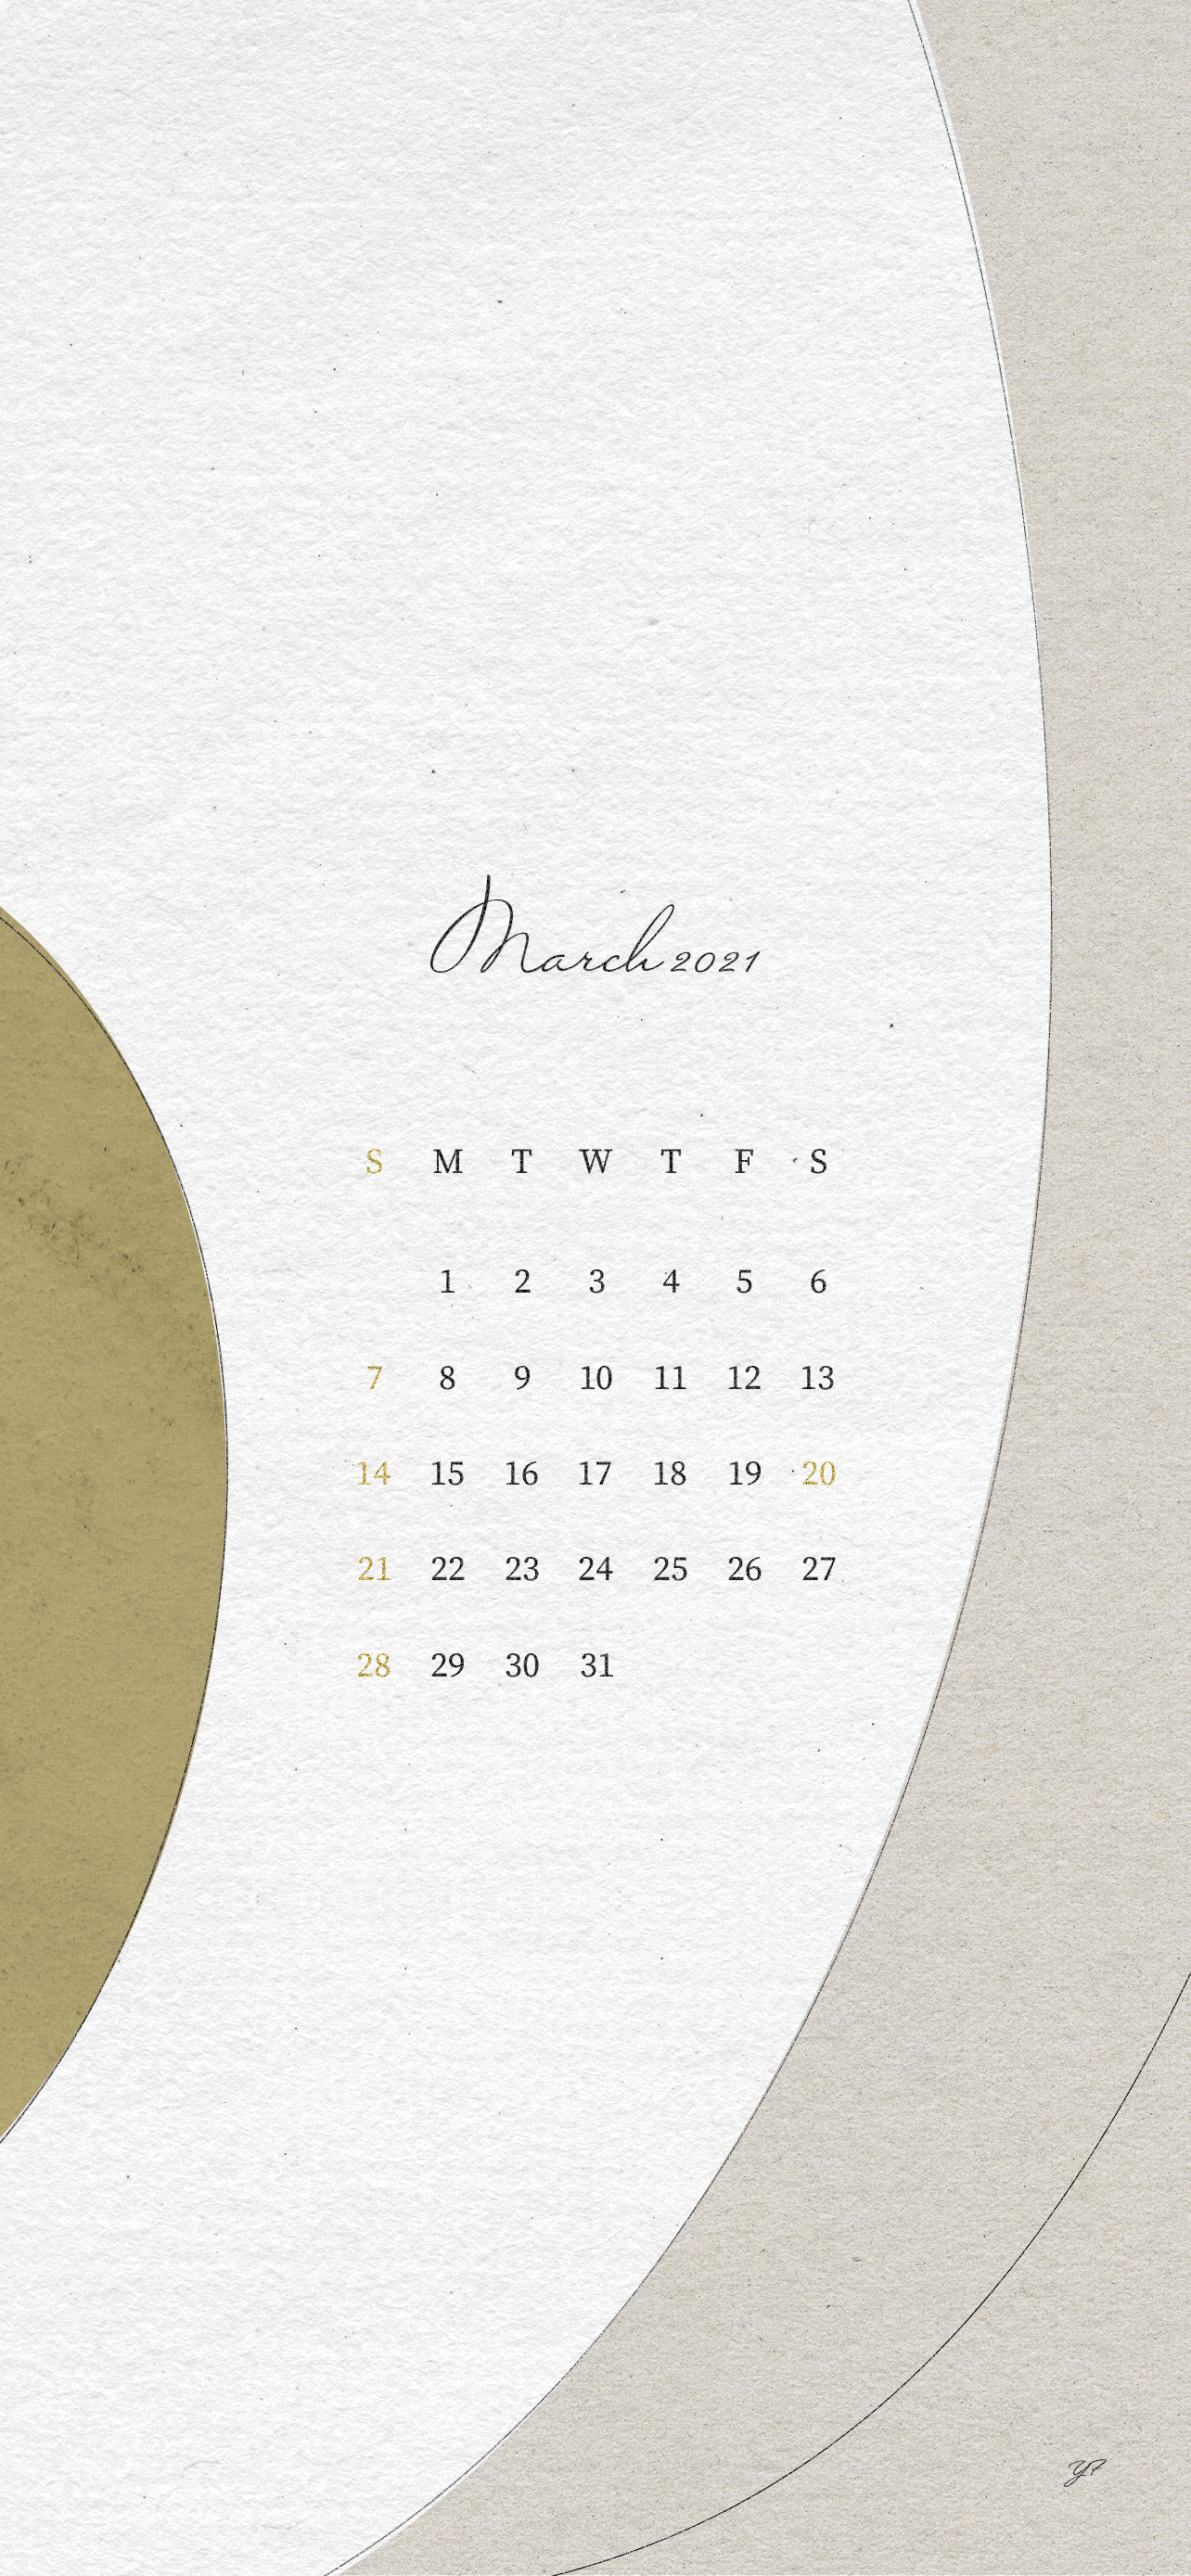 March 21 Calendar Wallpaper For The Iphone Yellow Ver Designed By Yf